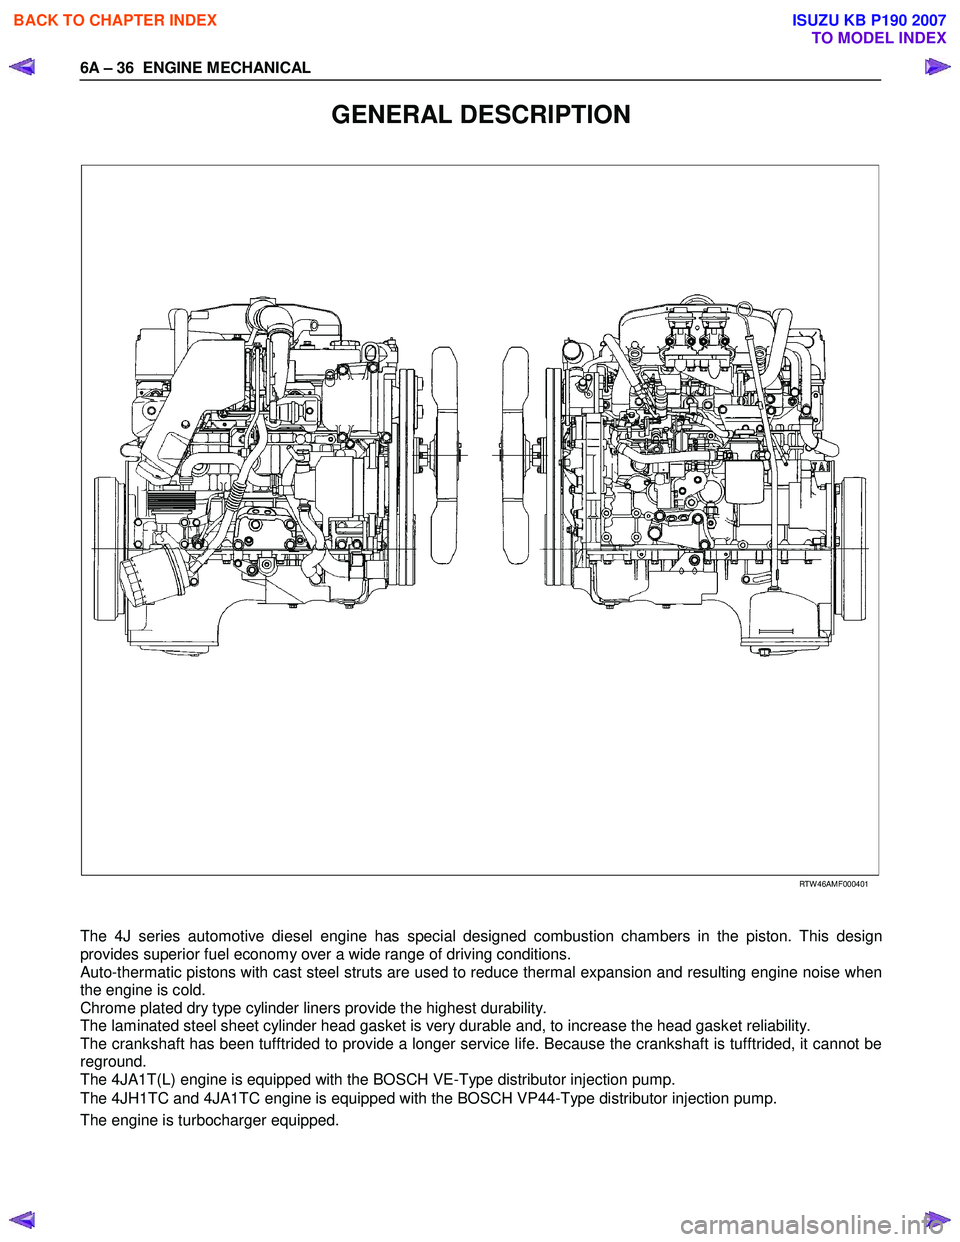 ISUZU KB P190 2007  Workshop Repair Manual 6A – 36  ENGINE MECHANICAL 
GENERAL DESCRIPTION 
  
 
  
 
 
 
 
 
 
 RTW 46AMF000401 
  
The 4J series automotive diesel engine has special designed combustion chambers in the piston. This design  